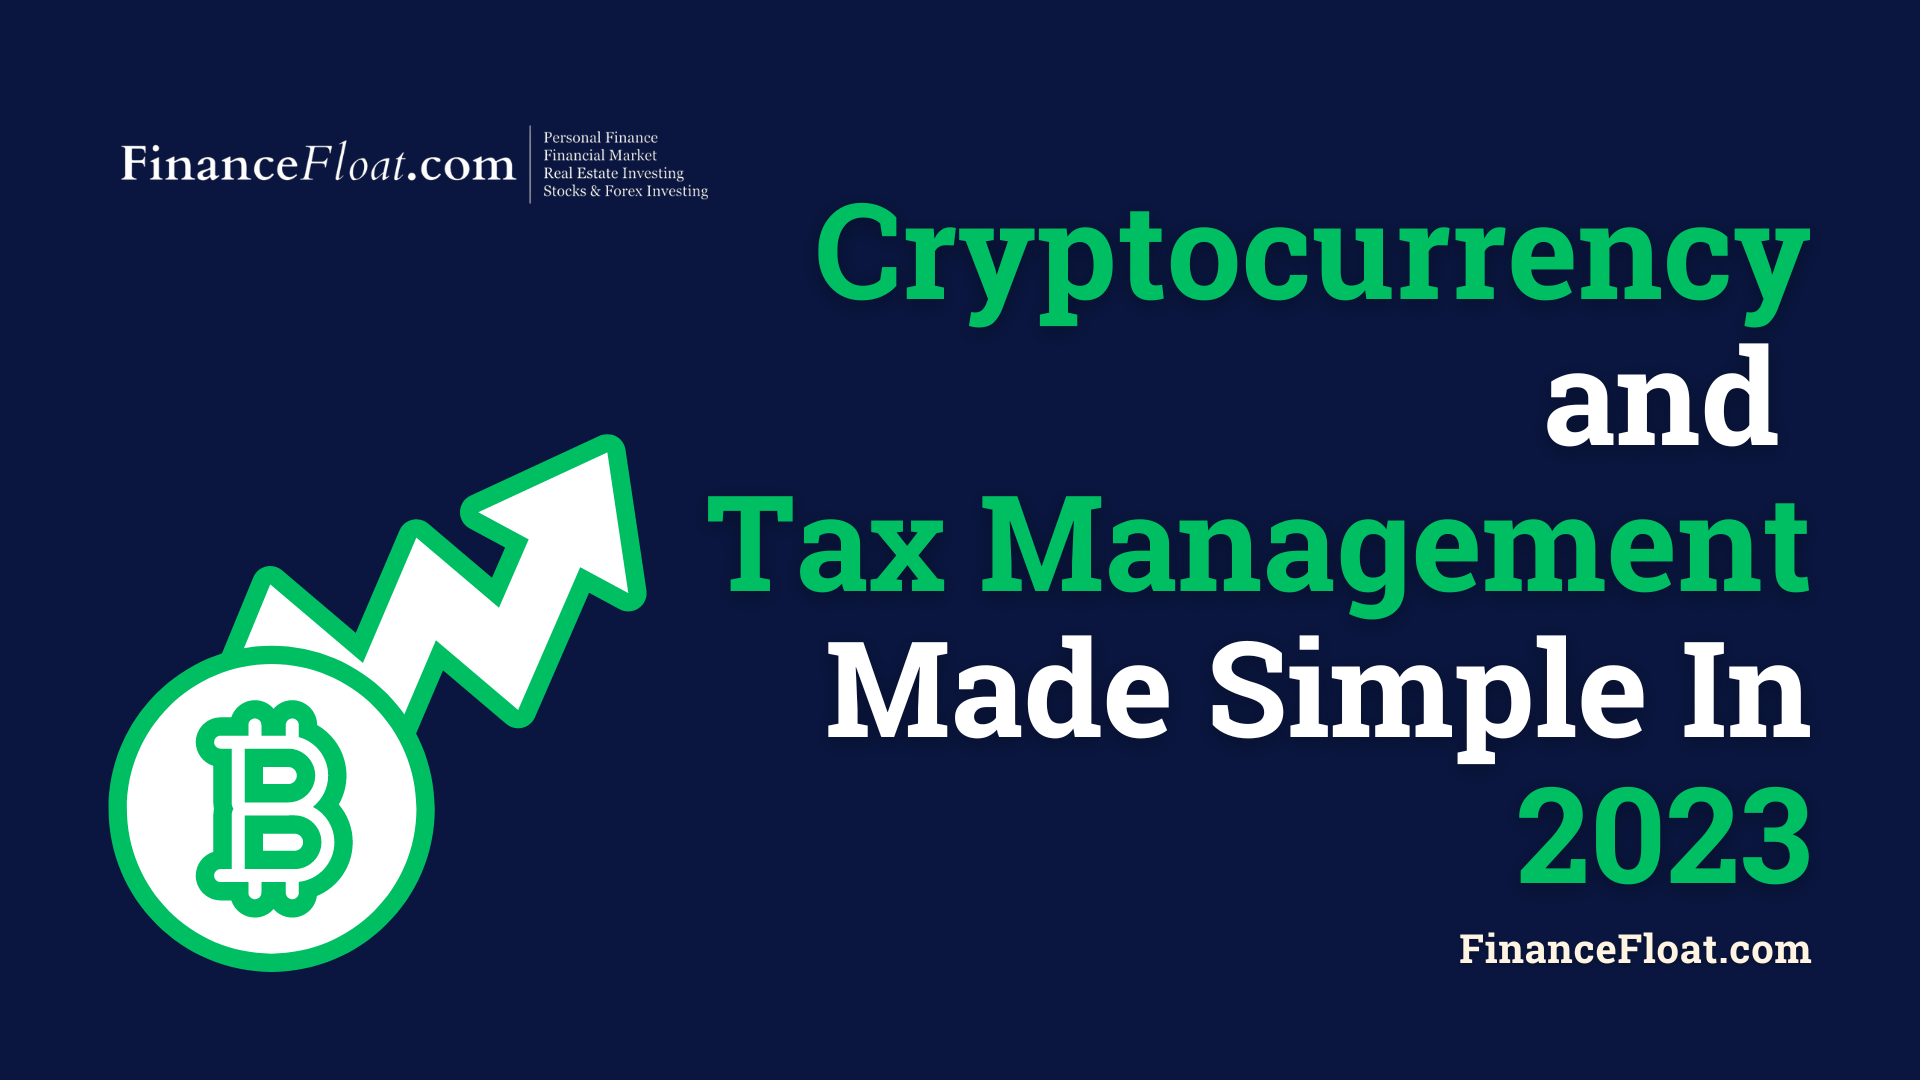 Cryptocurrency and Tax Management Made Simple In 2023